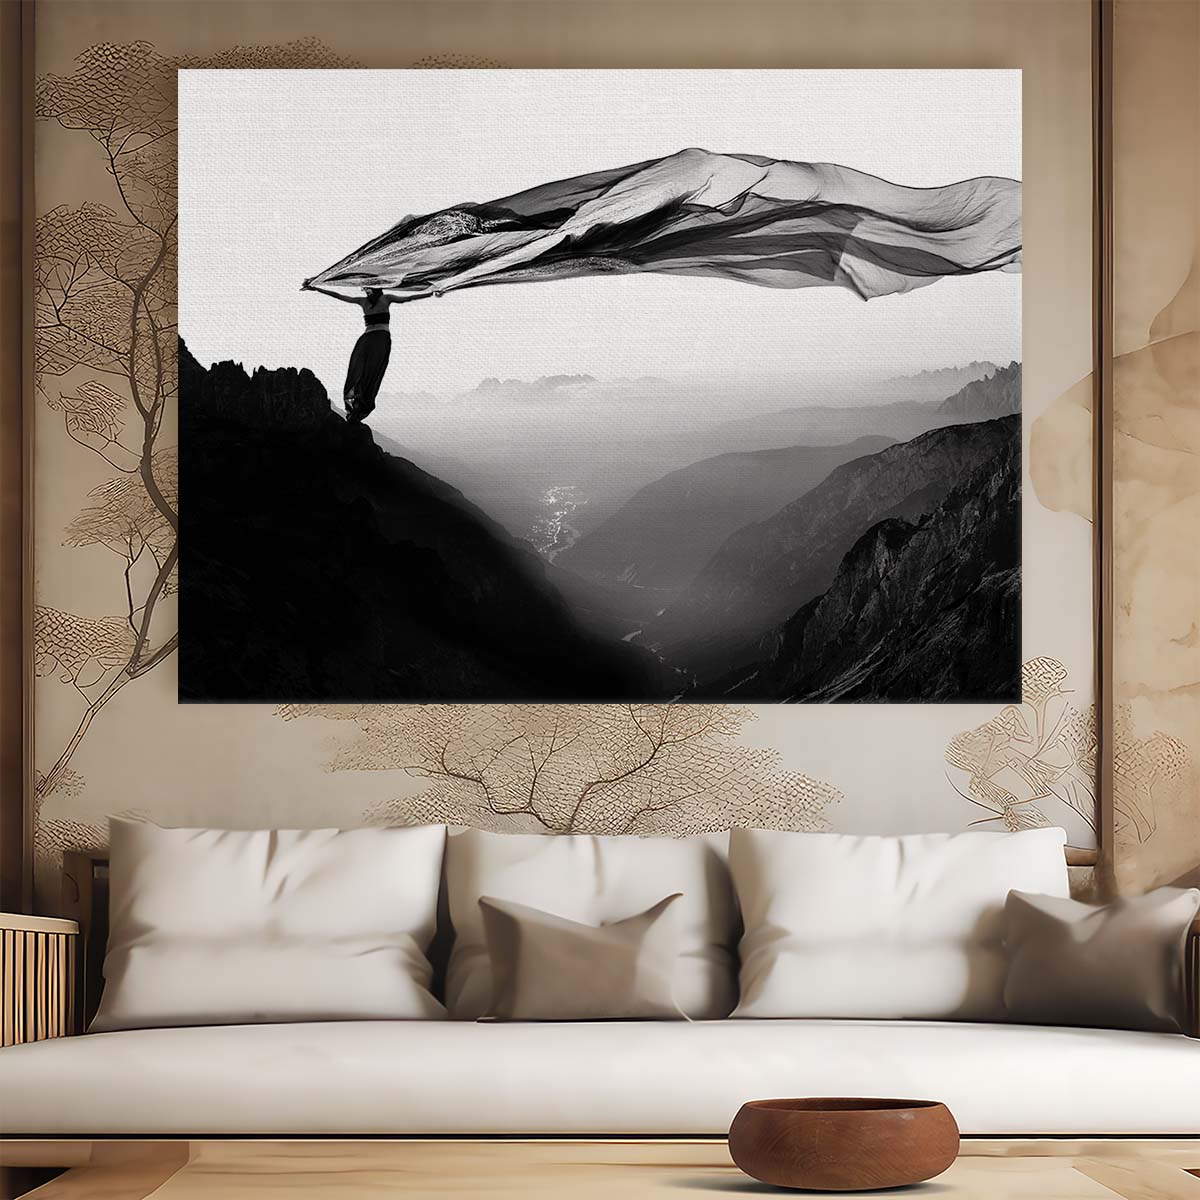 Monochrome Girl Conquering Windy Mountain Landscape Wall Art by Luxuriance Designs. Made in USA.